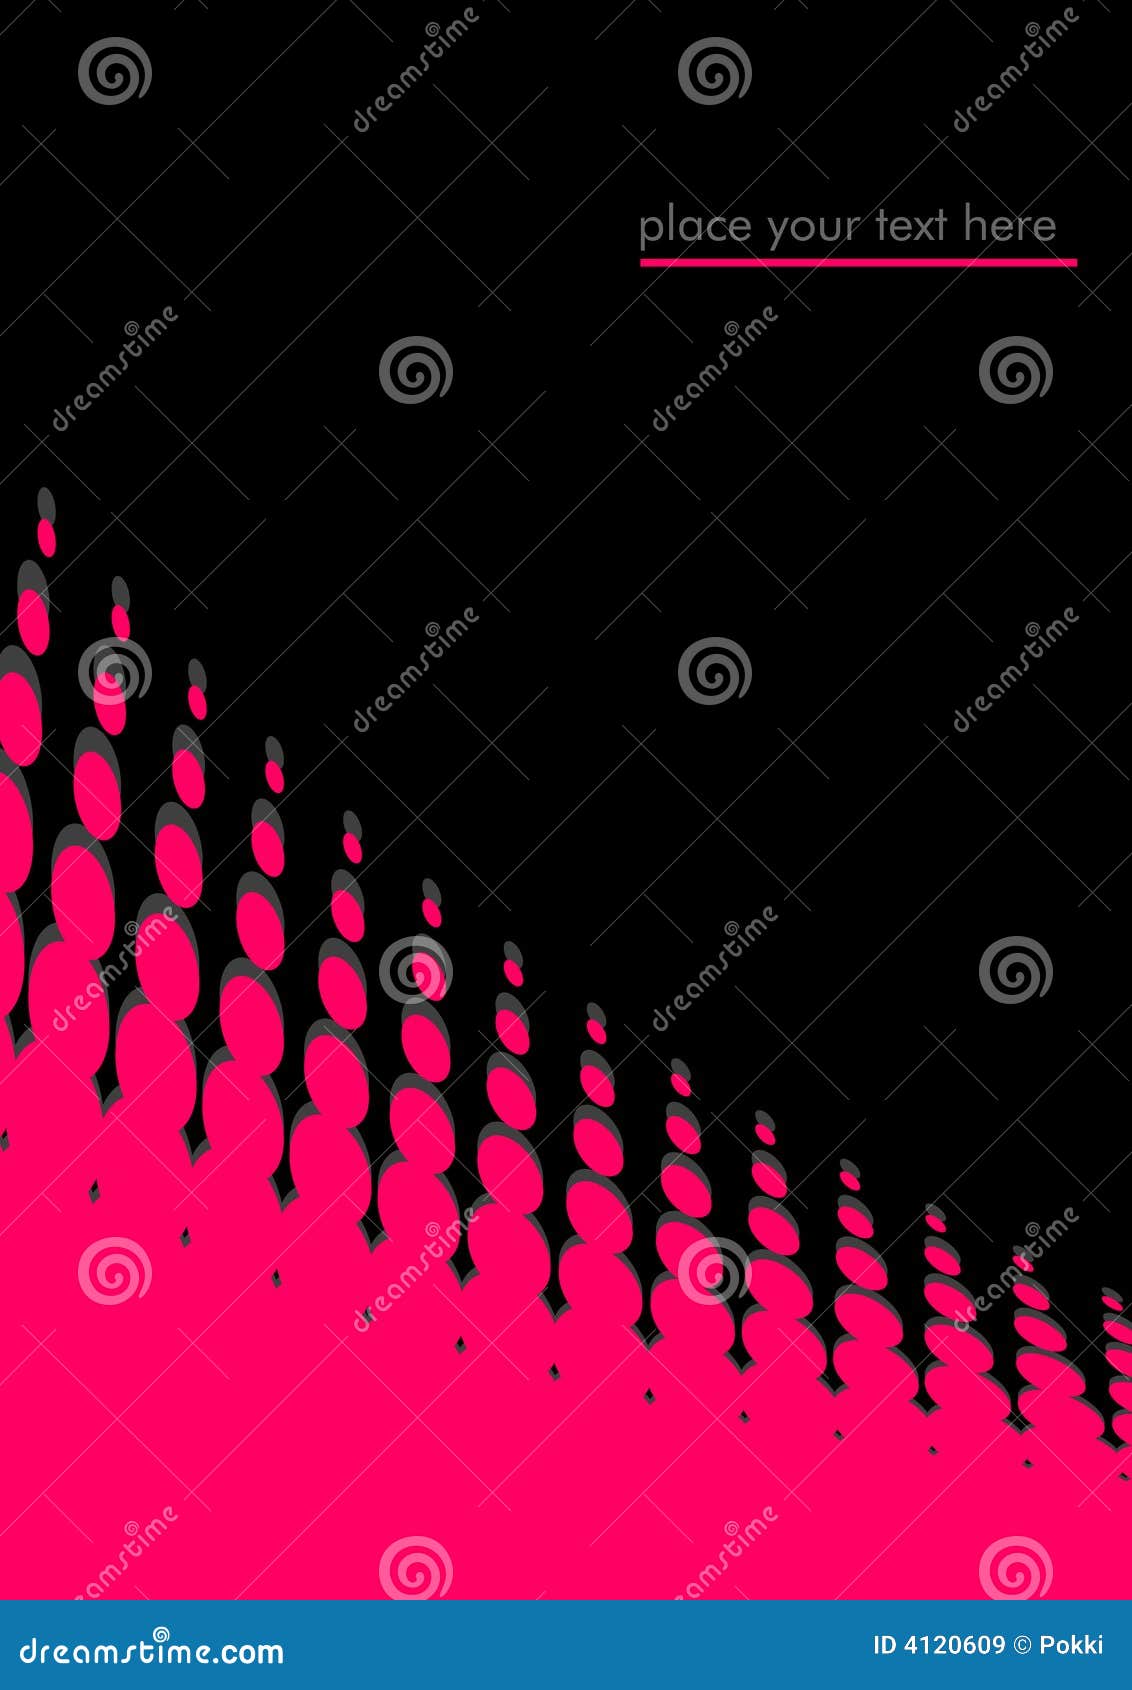 Background With Pink Circles. Stock Vector - Illustration of round